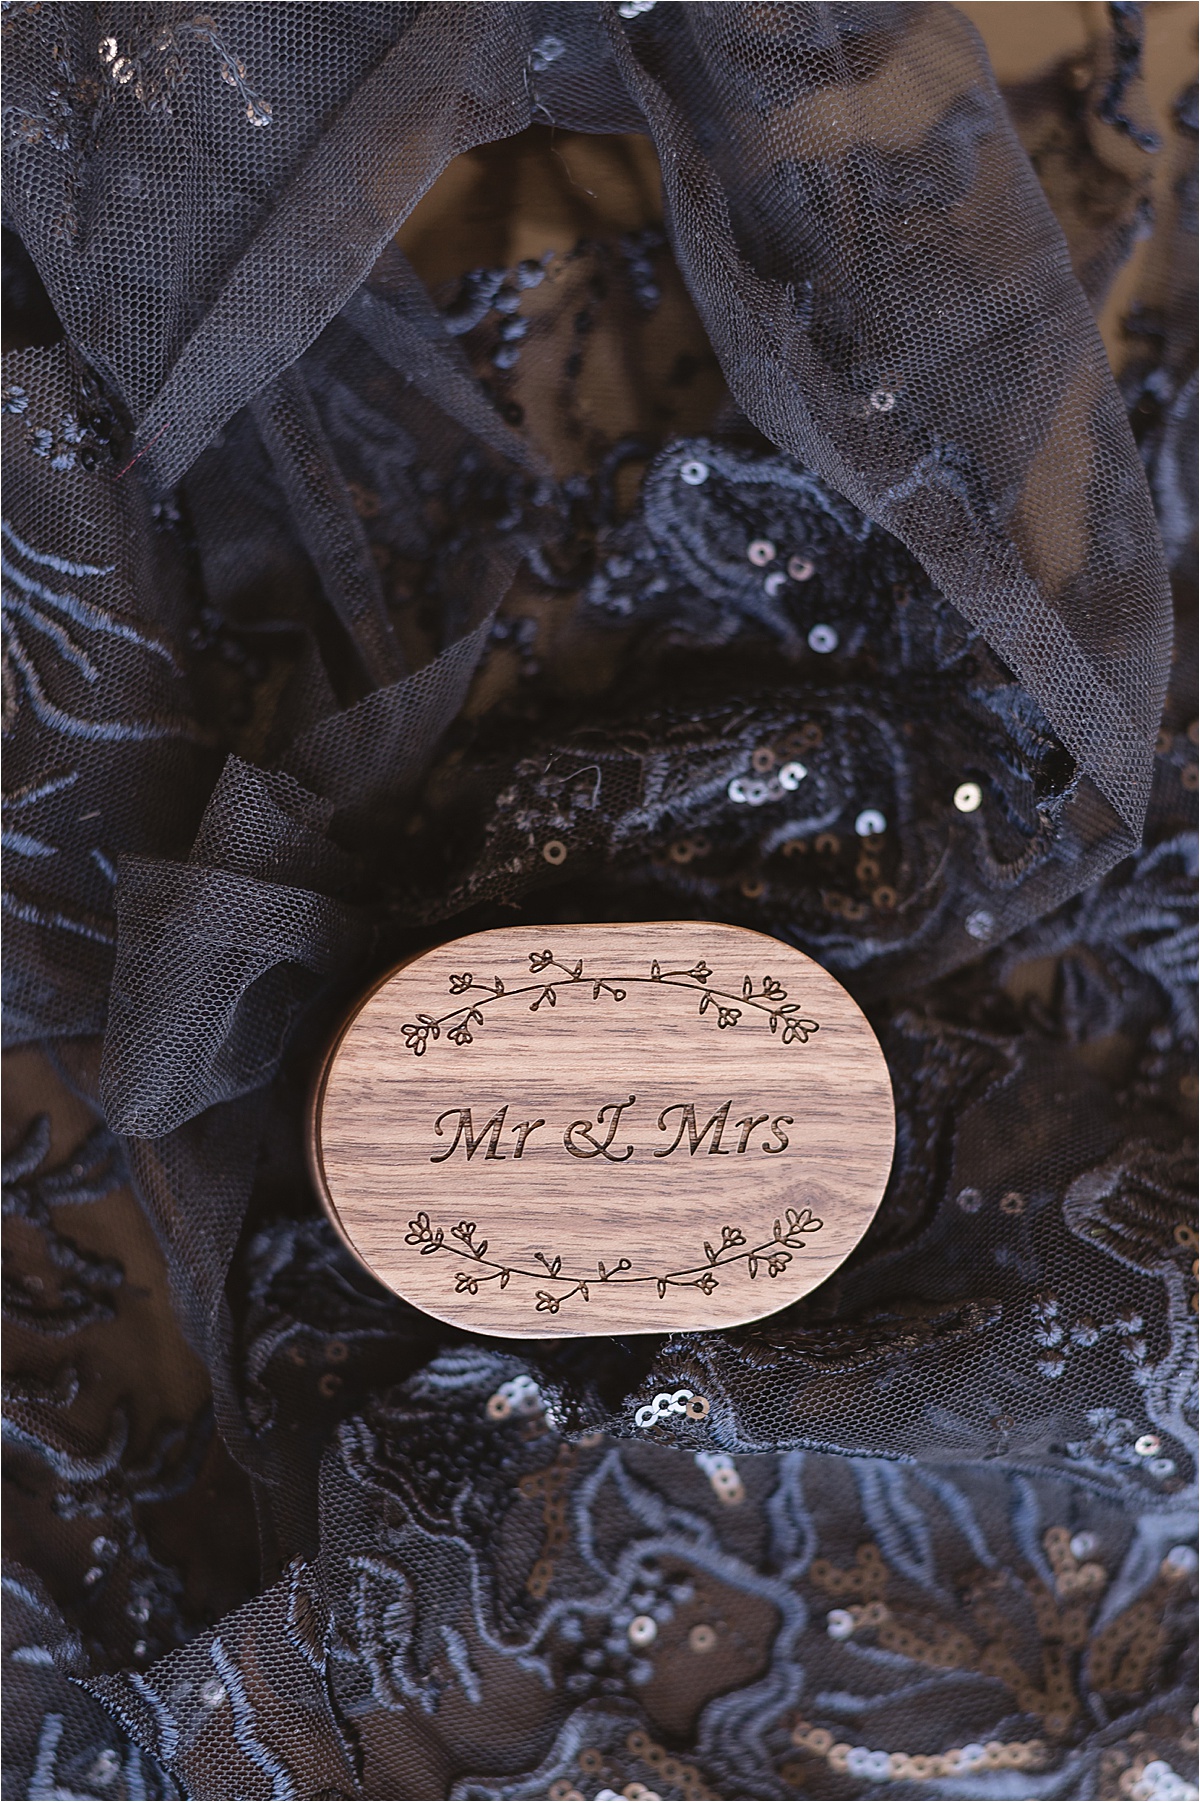 wedding ring box from halloween wedding on black sparkly material